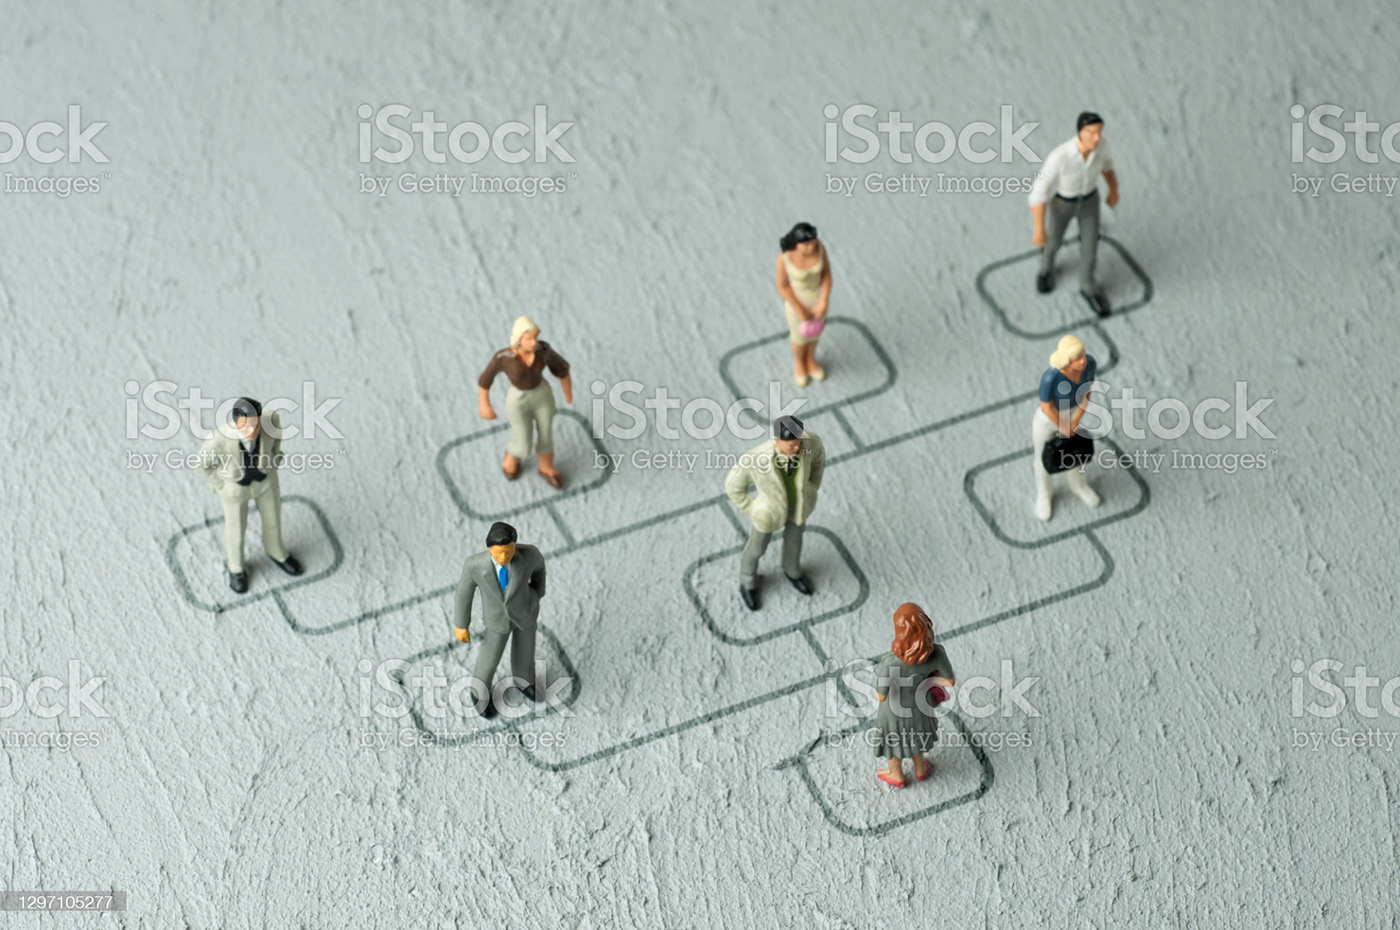 business business person Corporate Hierarchy economy figurine Global risk strategy TEAMWORK